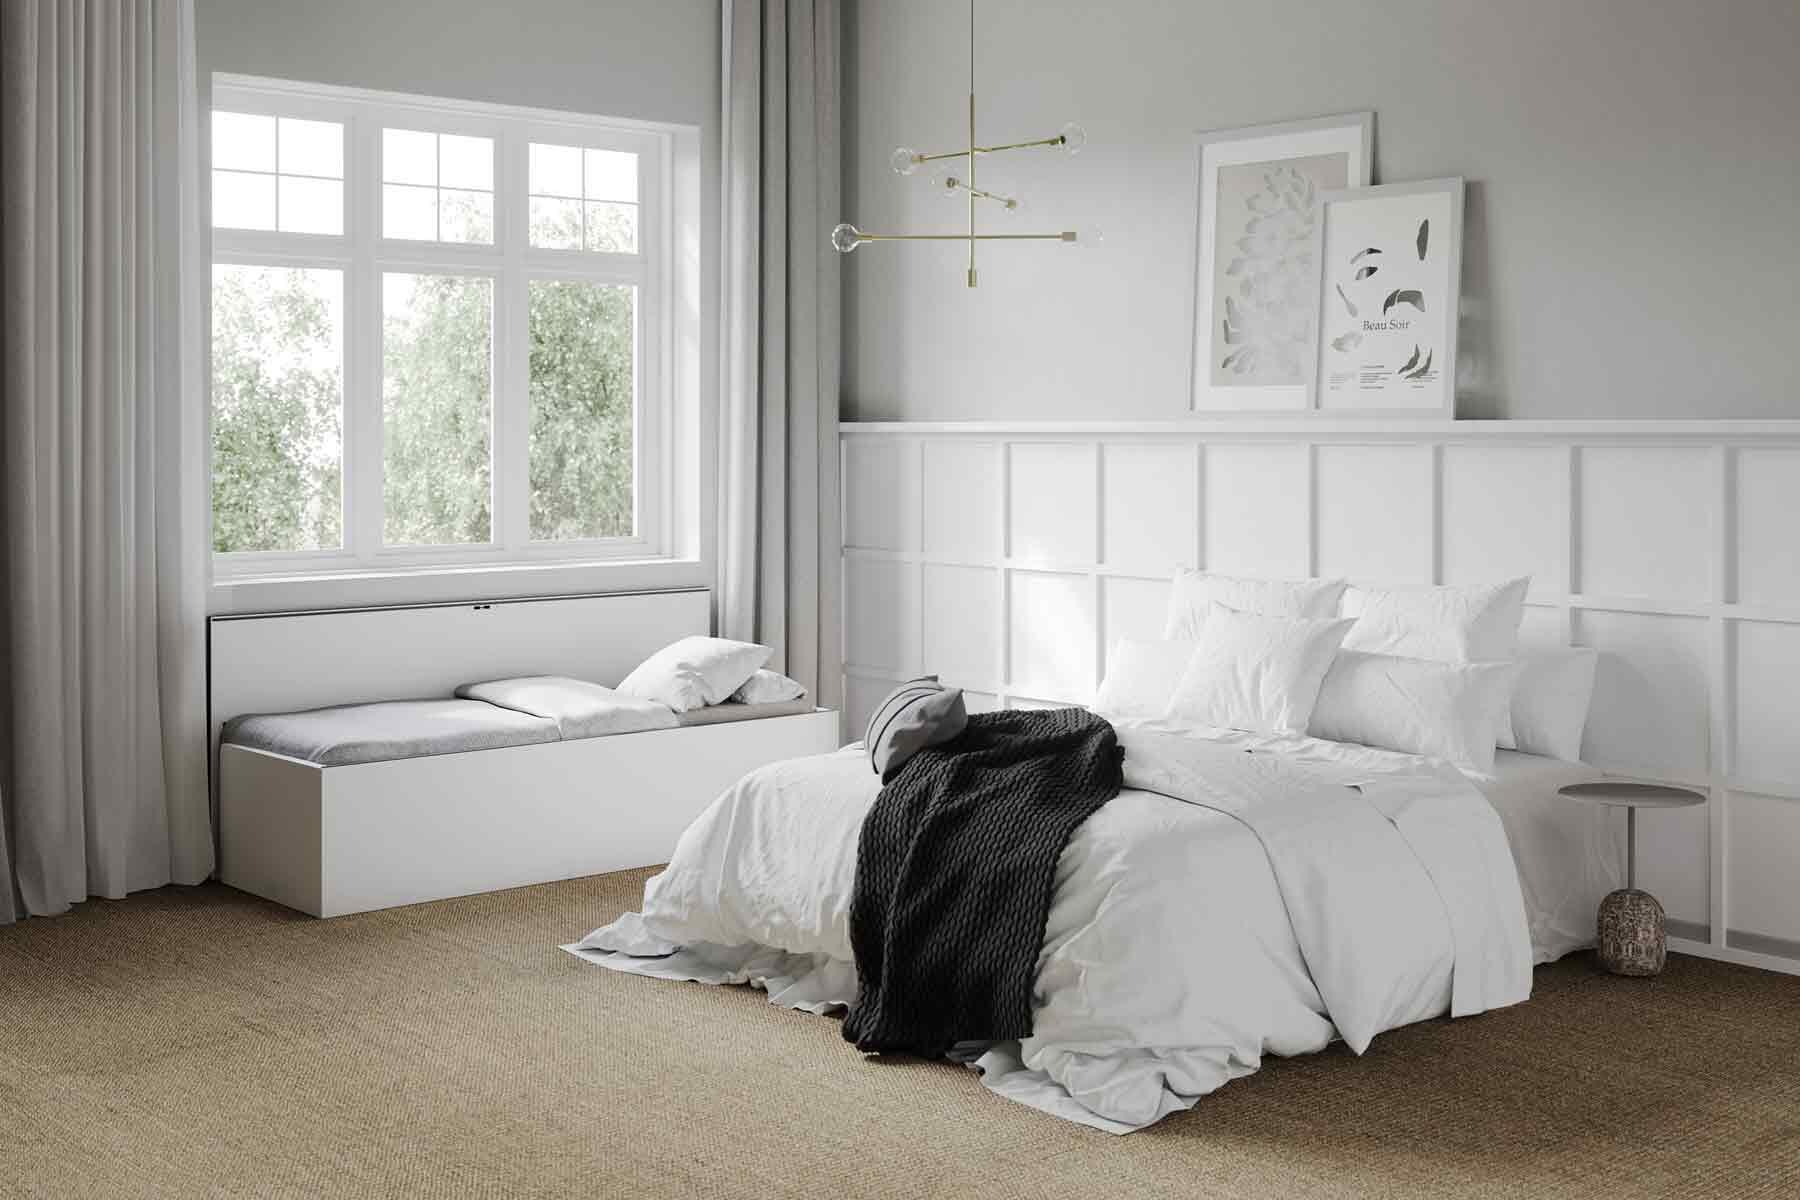 Table Bed White 85x200 Cm Single, 2×4 King Bed Frame